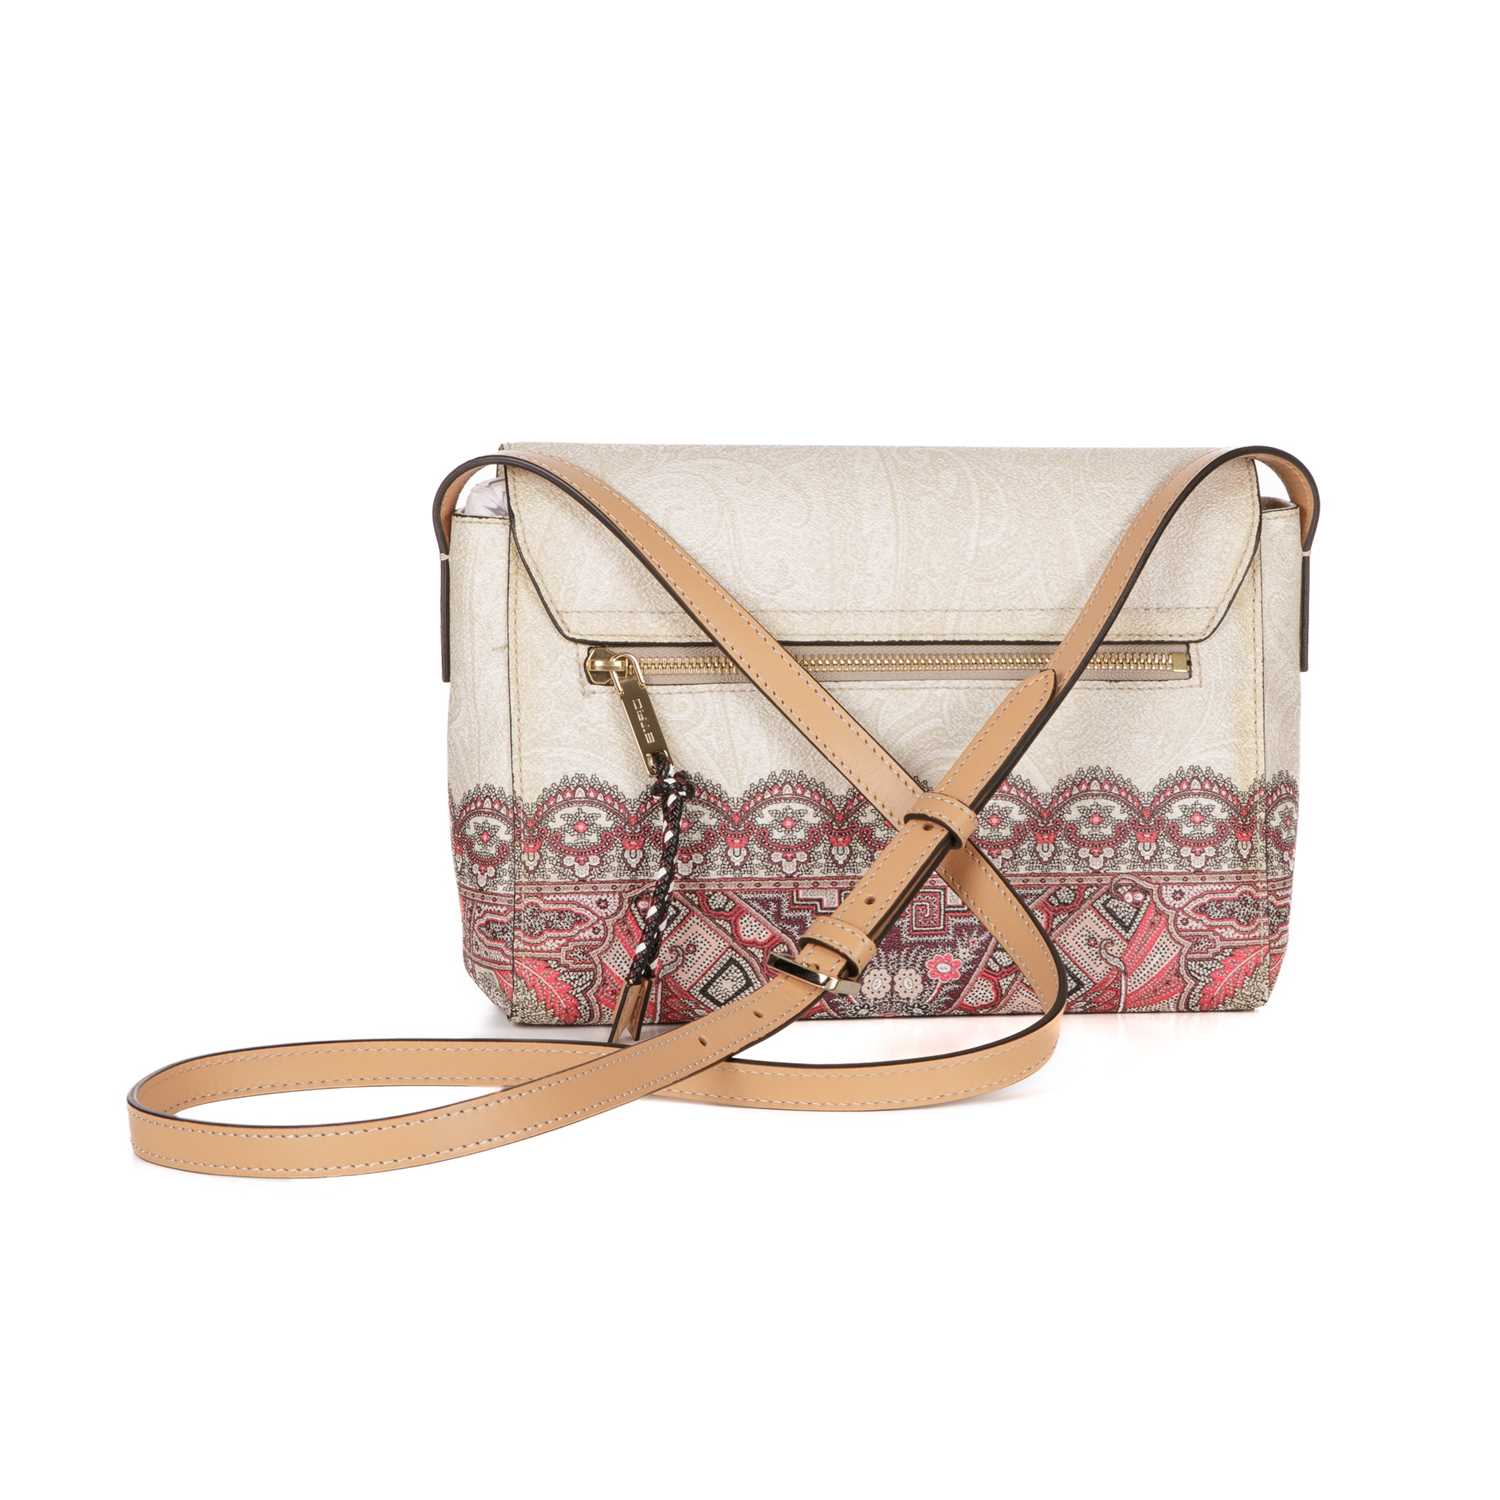 Etro, a coated canvas crossbody handbag, featuring a subtle paisley pattern to the cream exterior - Image 4 of 6